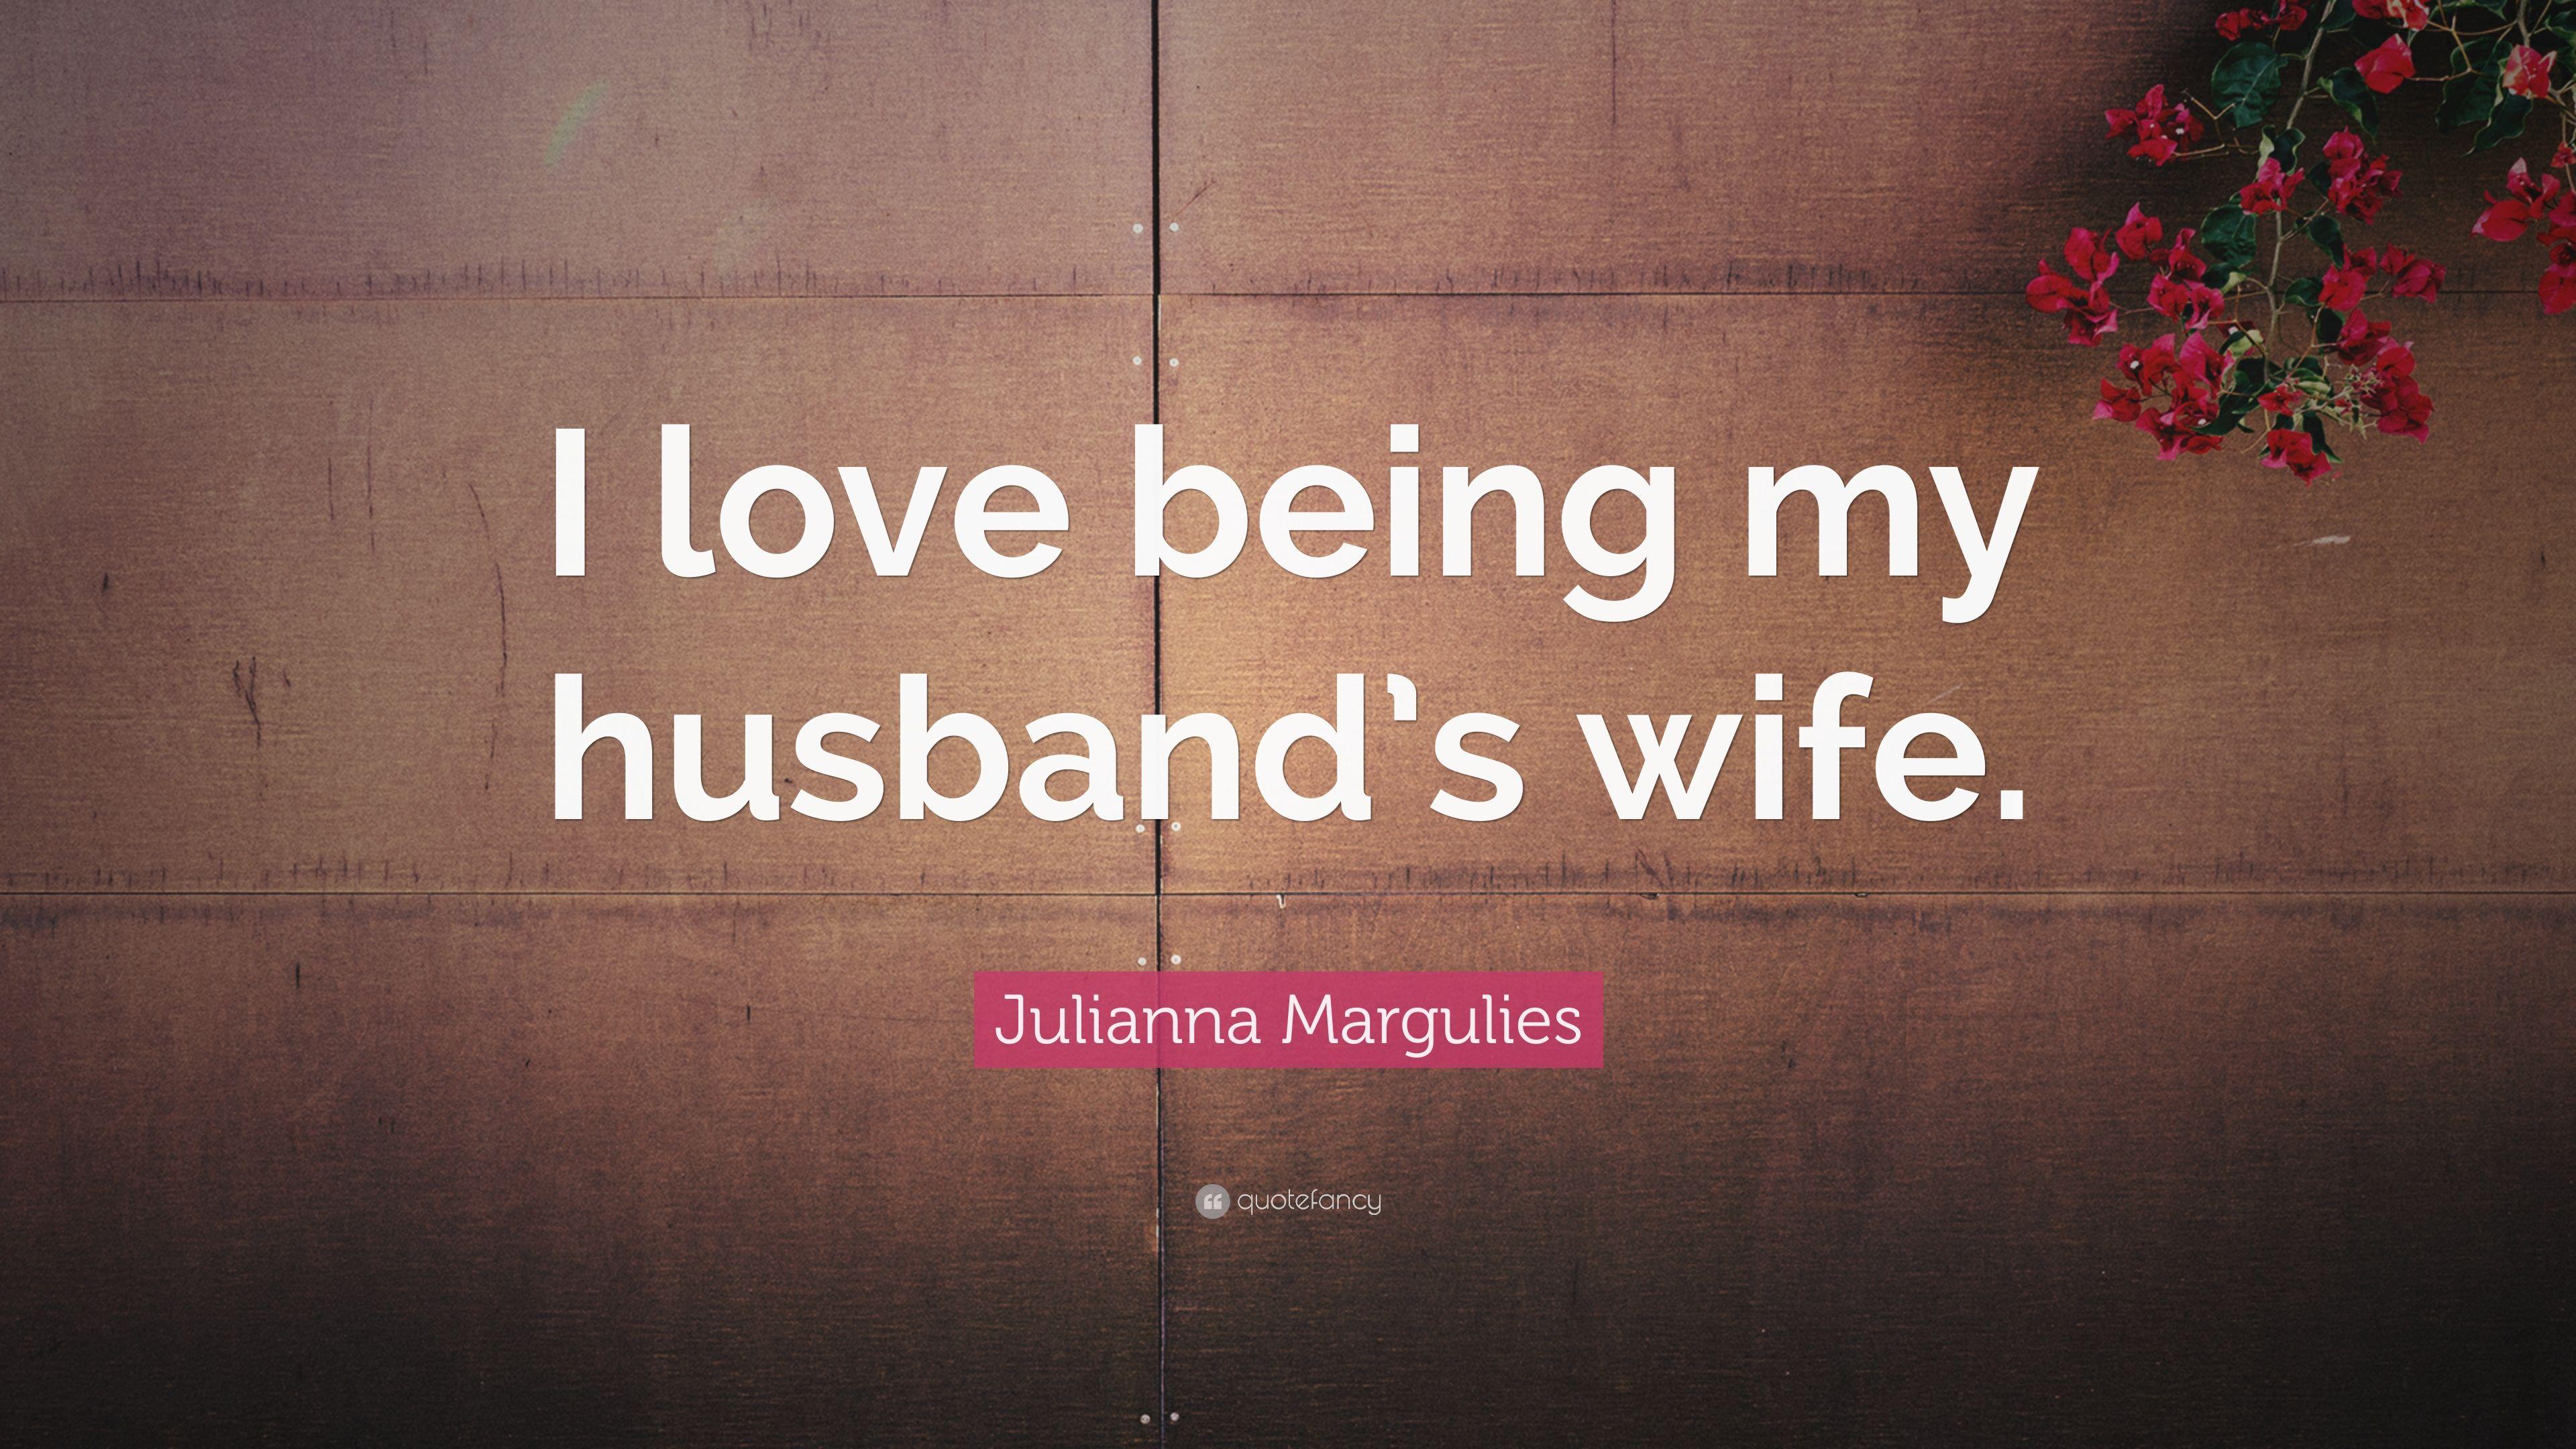 Julianna Margulies Quote: “I love being my husband's wife.” 7